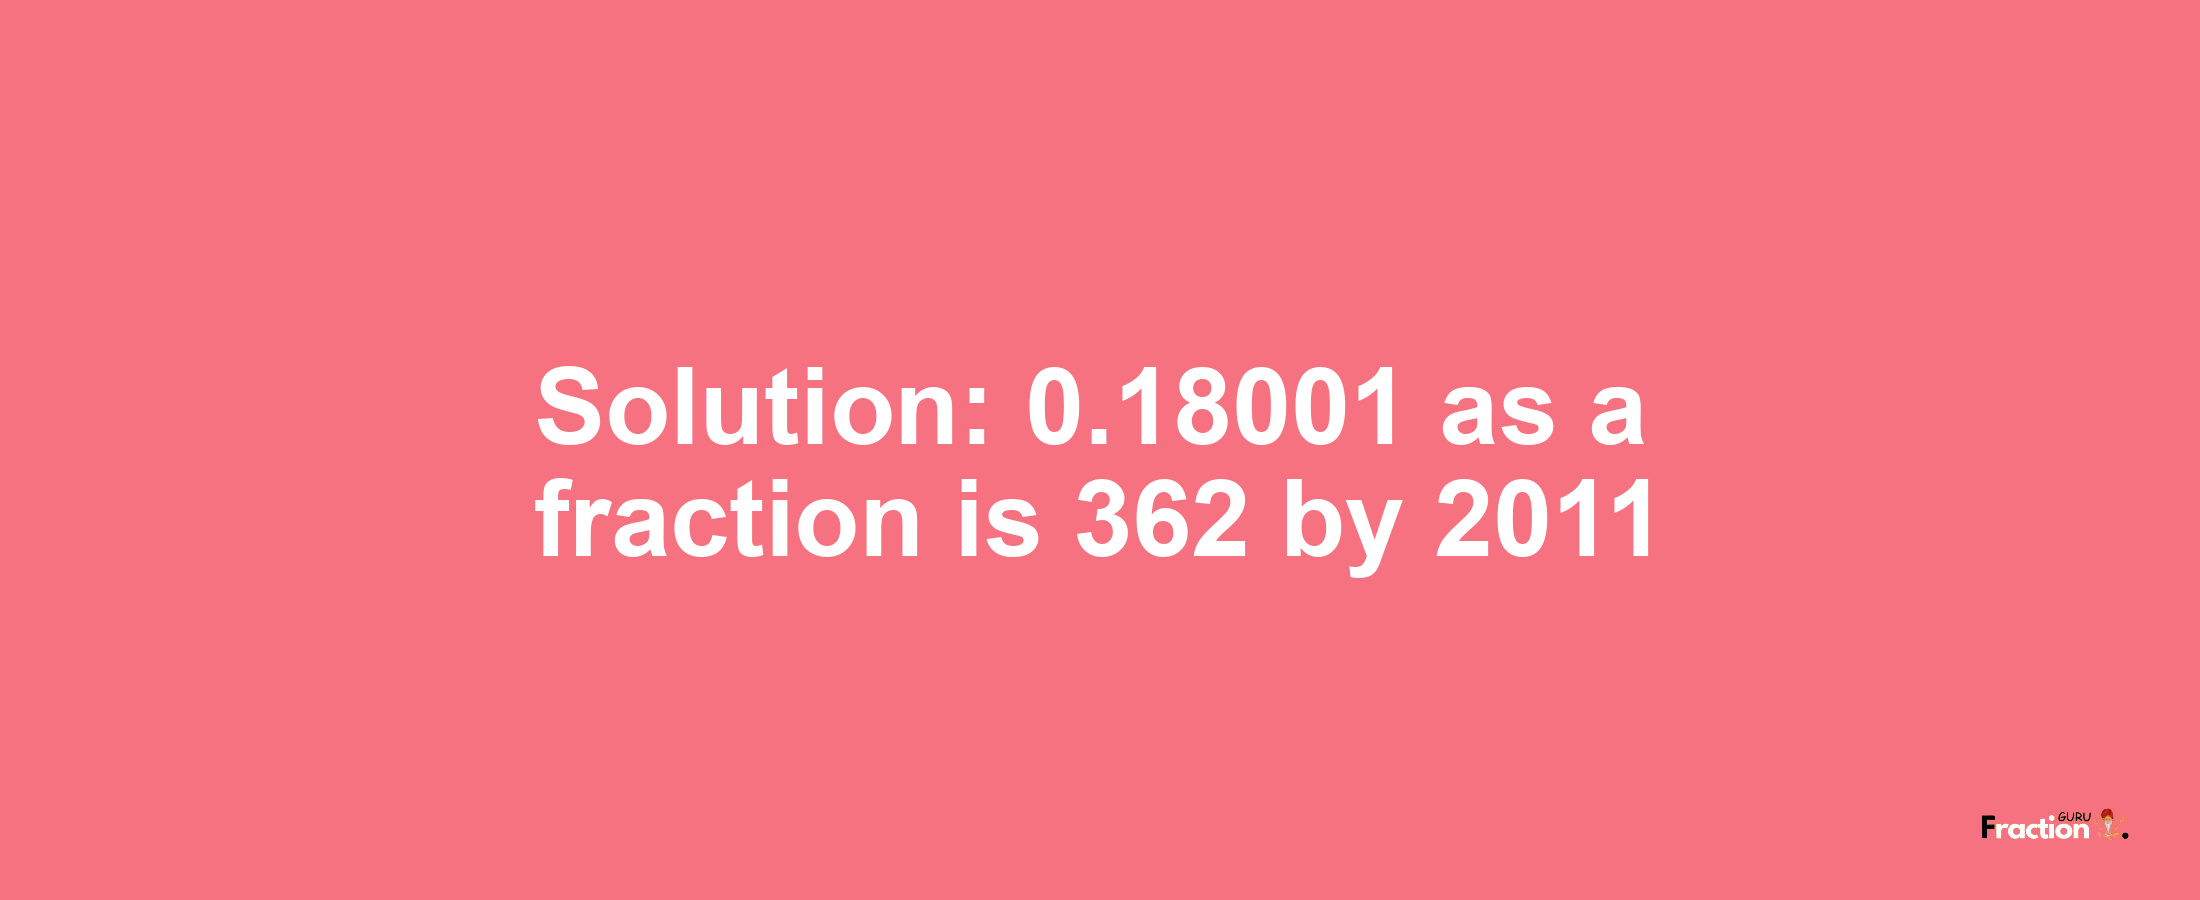 Solution:0.18001 as a fraction is 362/2011